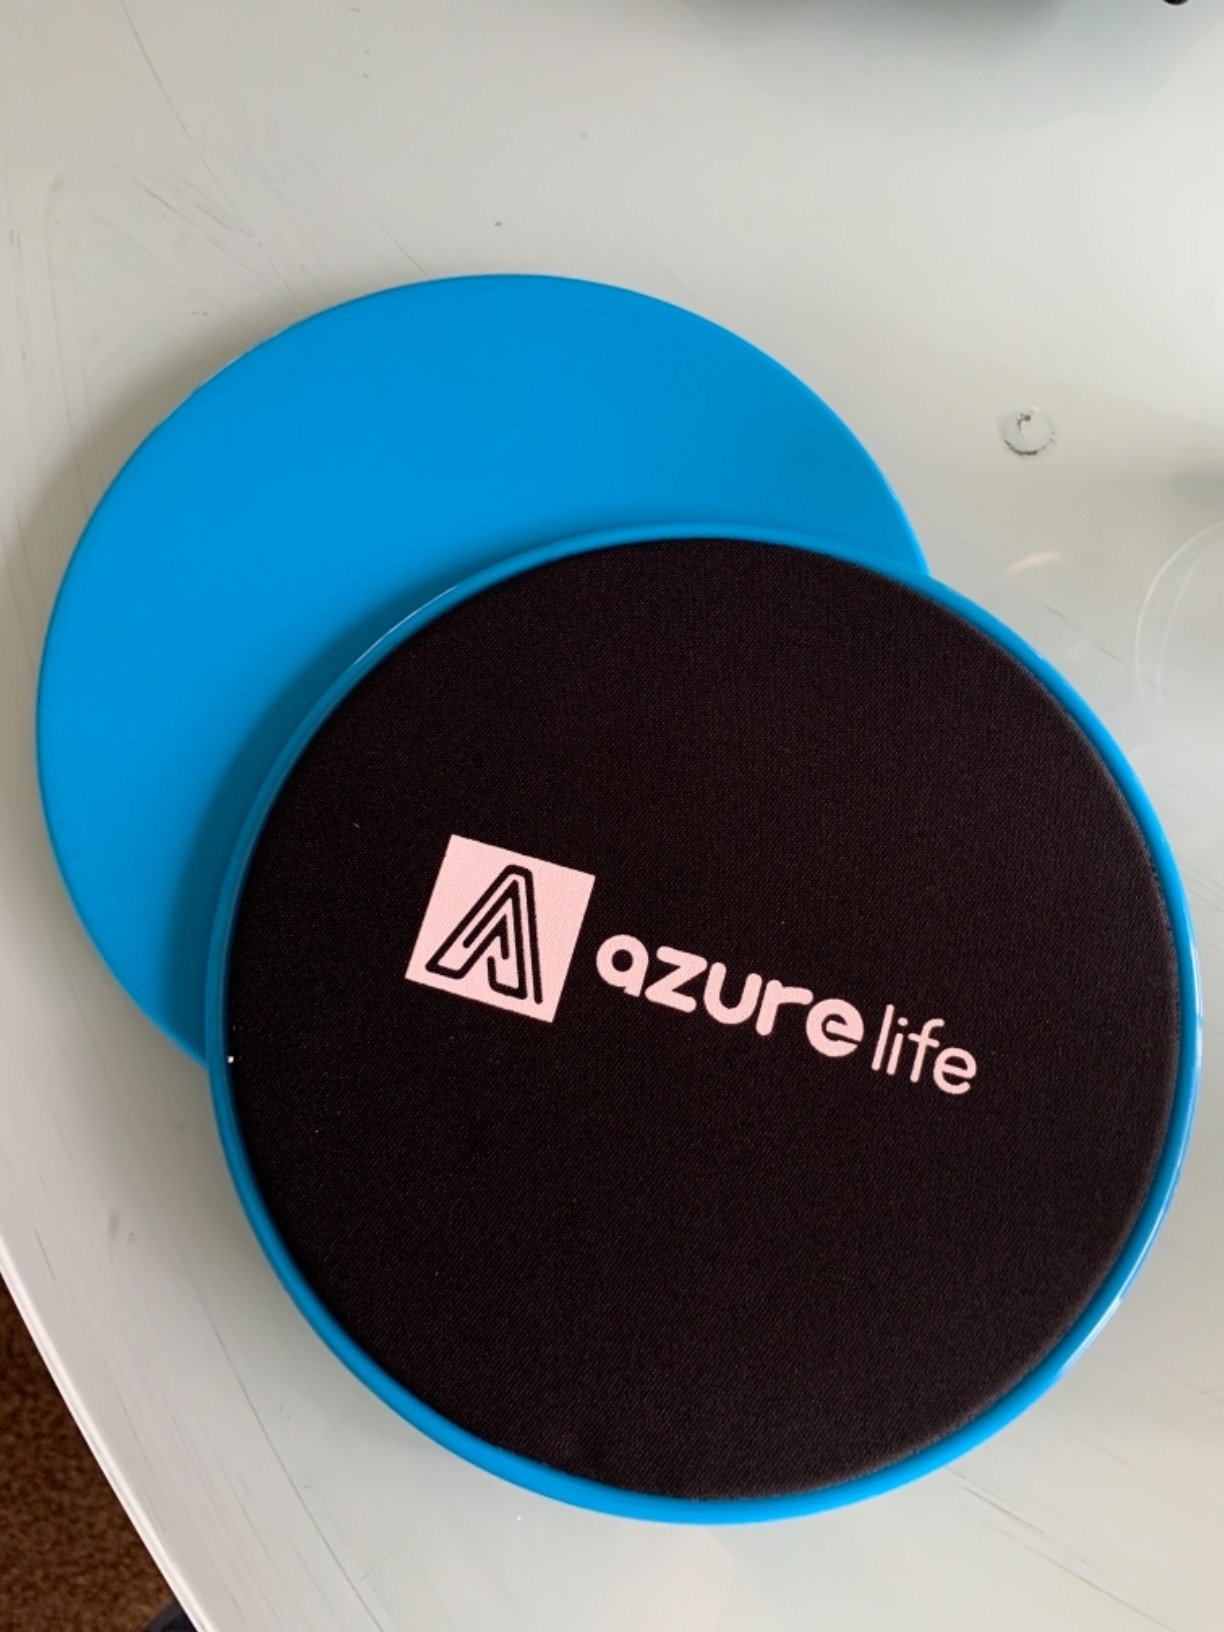 Two silicon grip strengtheners next to an Azurelife exercise pad on a table